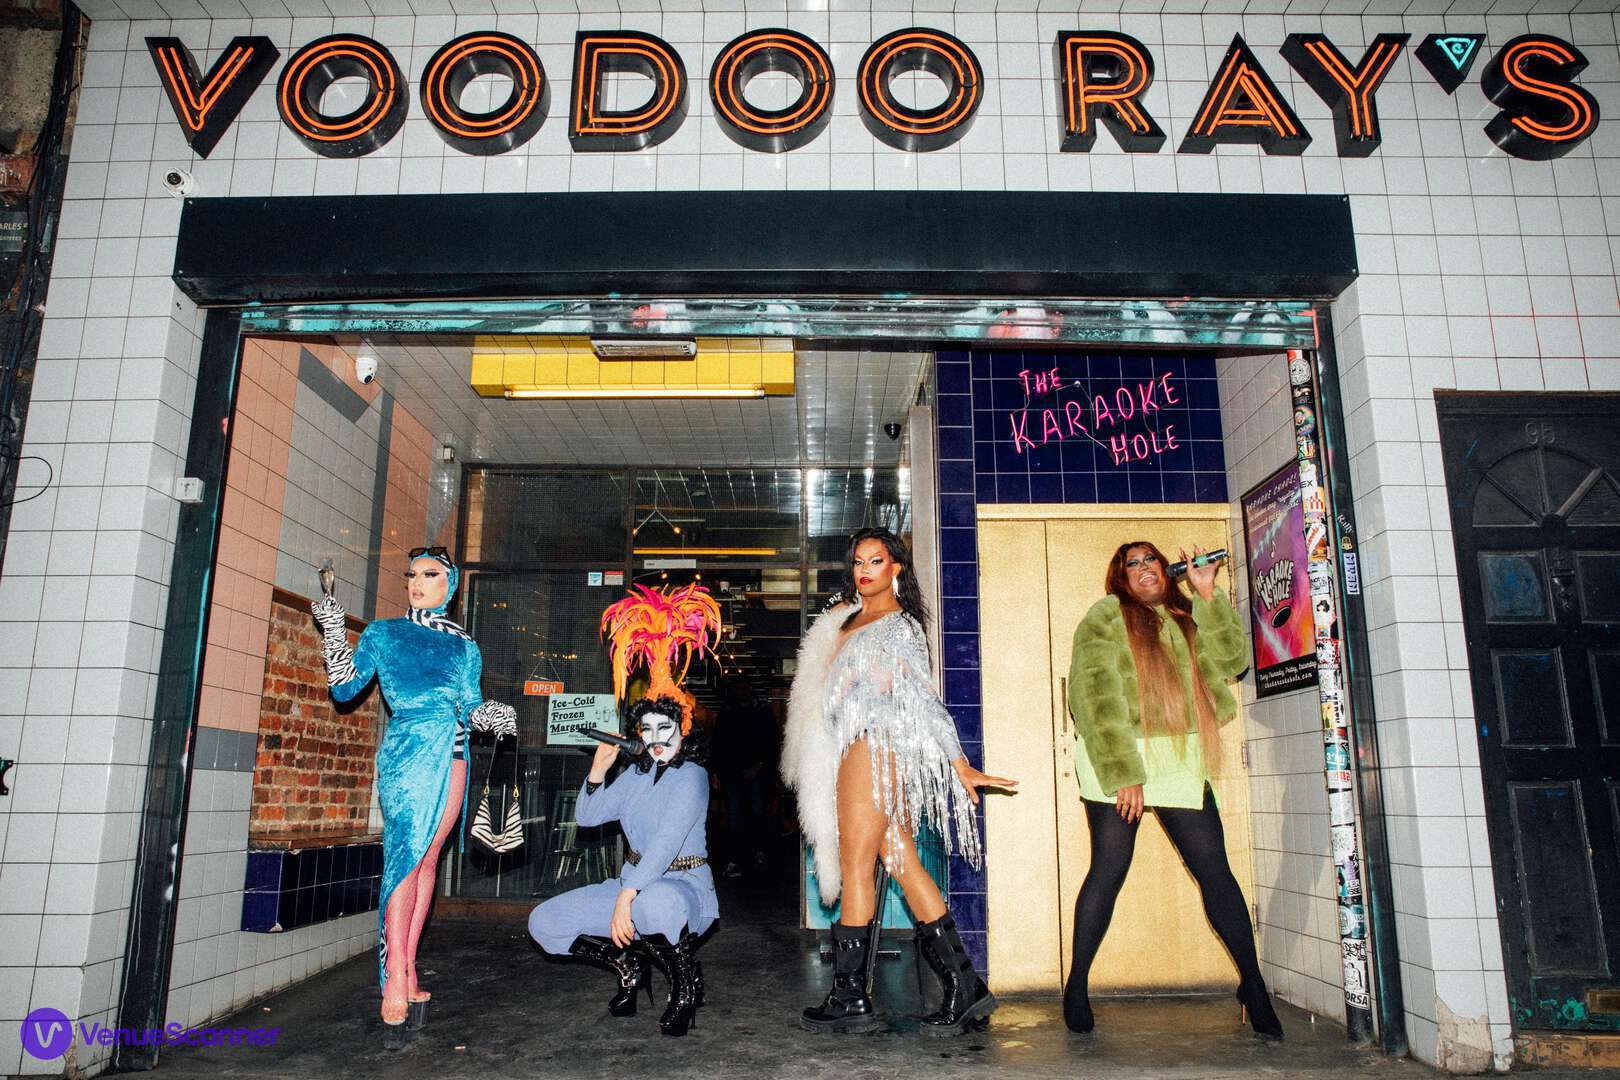 Hire Voodoo Ray's Dalston & The Karaoke Hole Both Venues